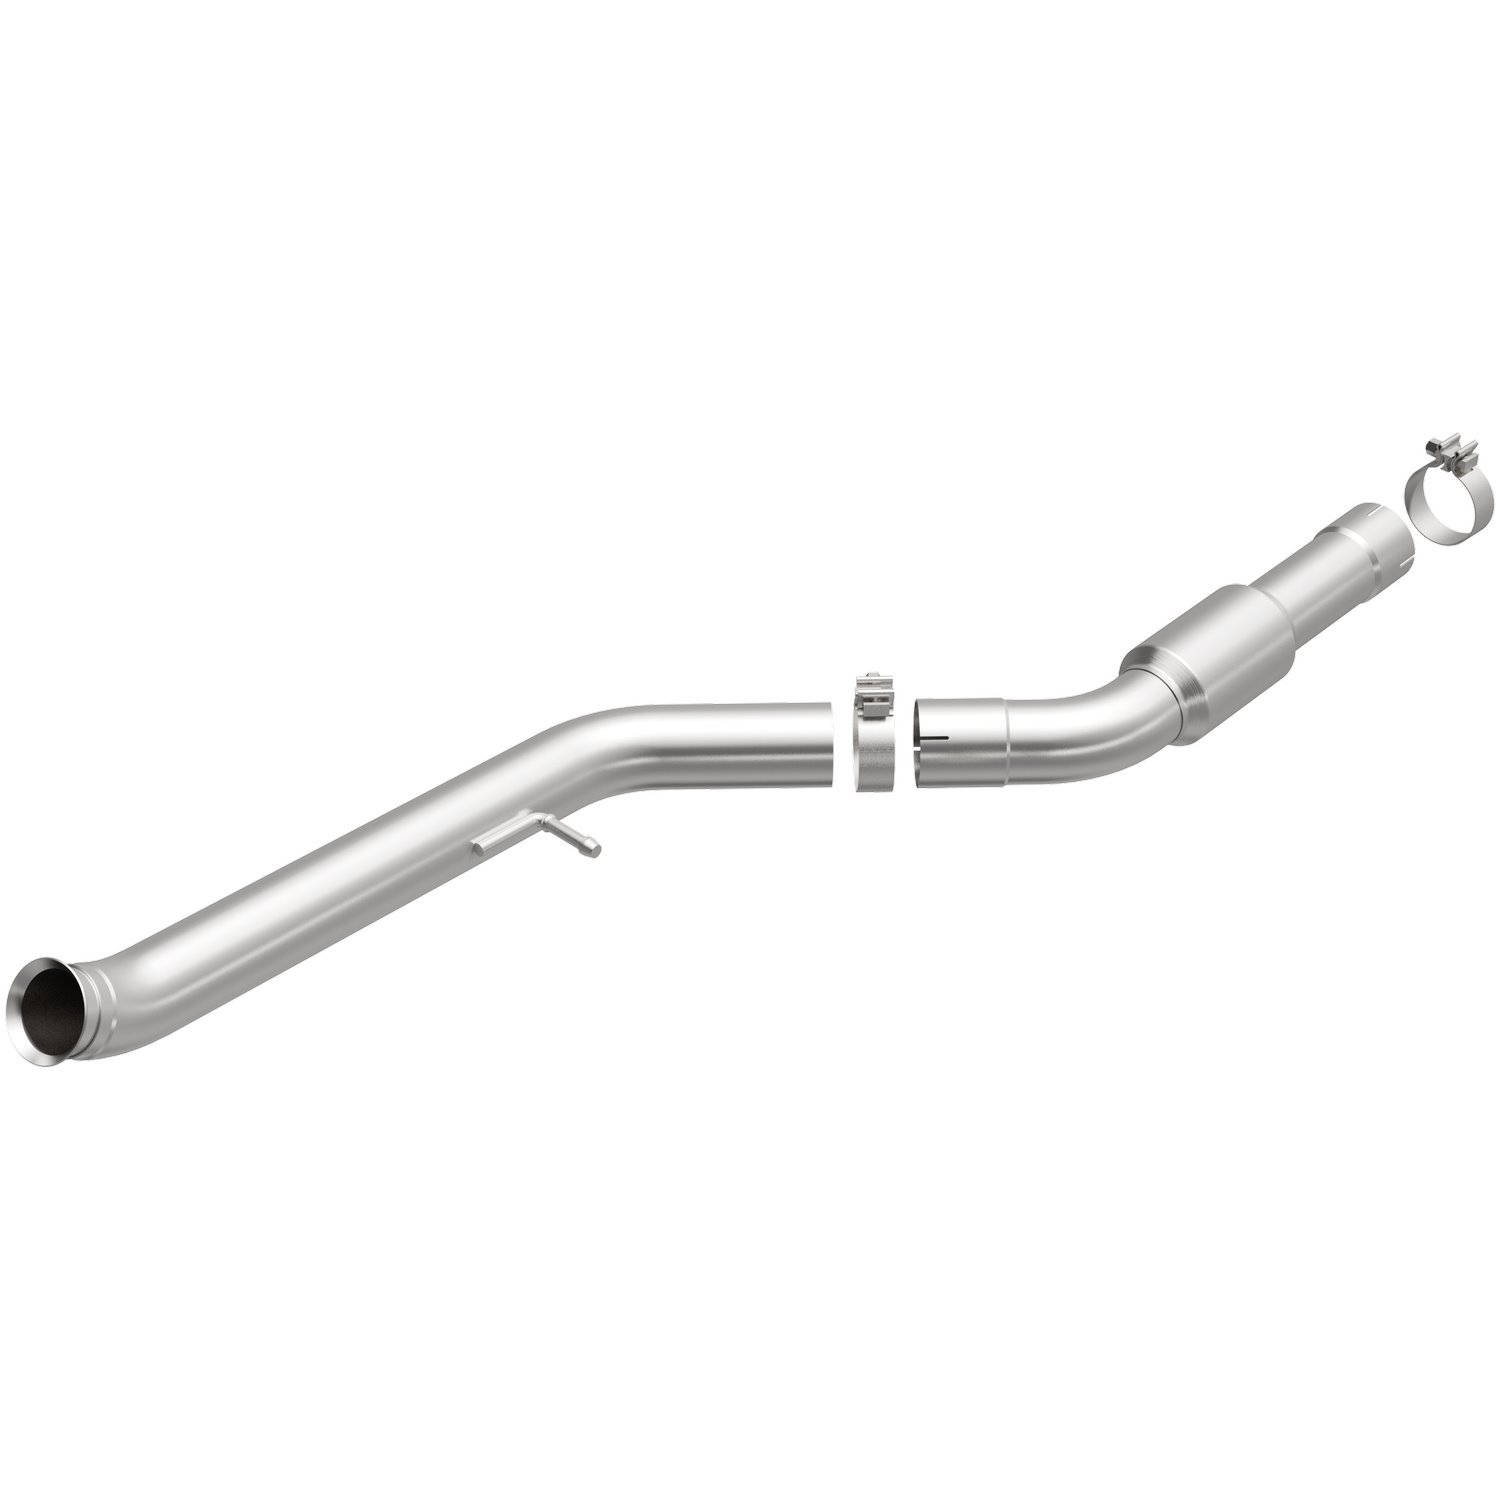 OEM Grade Federal / EPA Compliant Direct-Fit Catalytic Converter 21-554